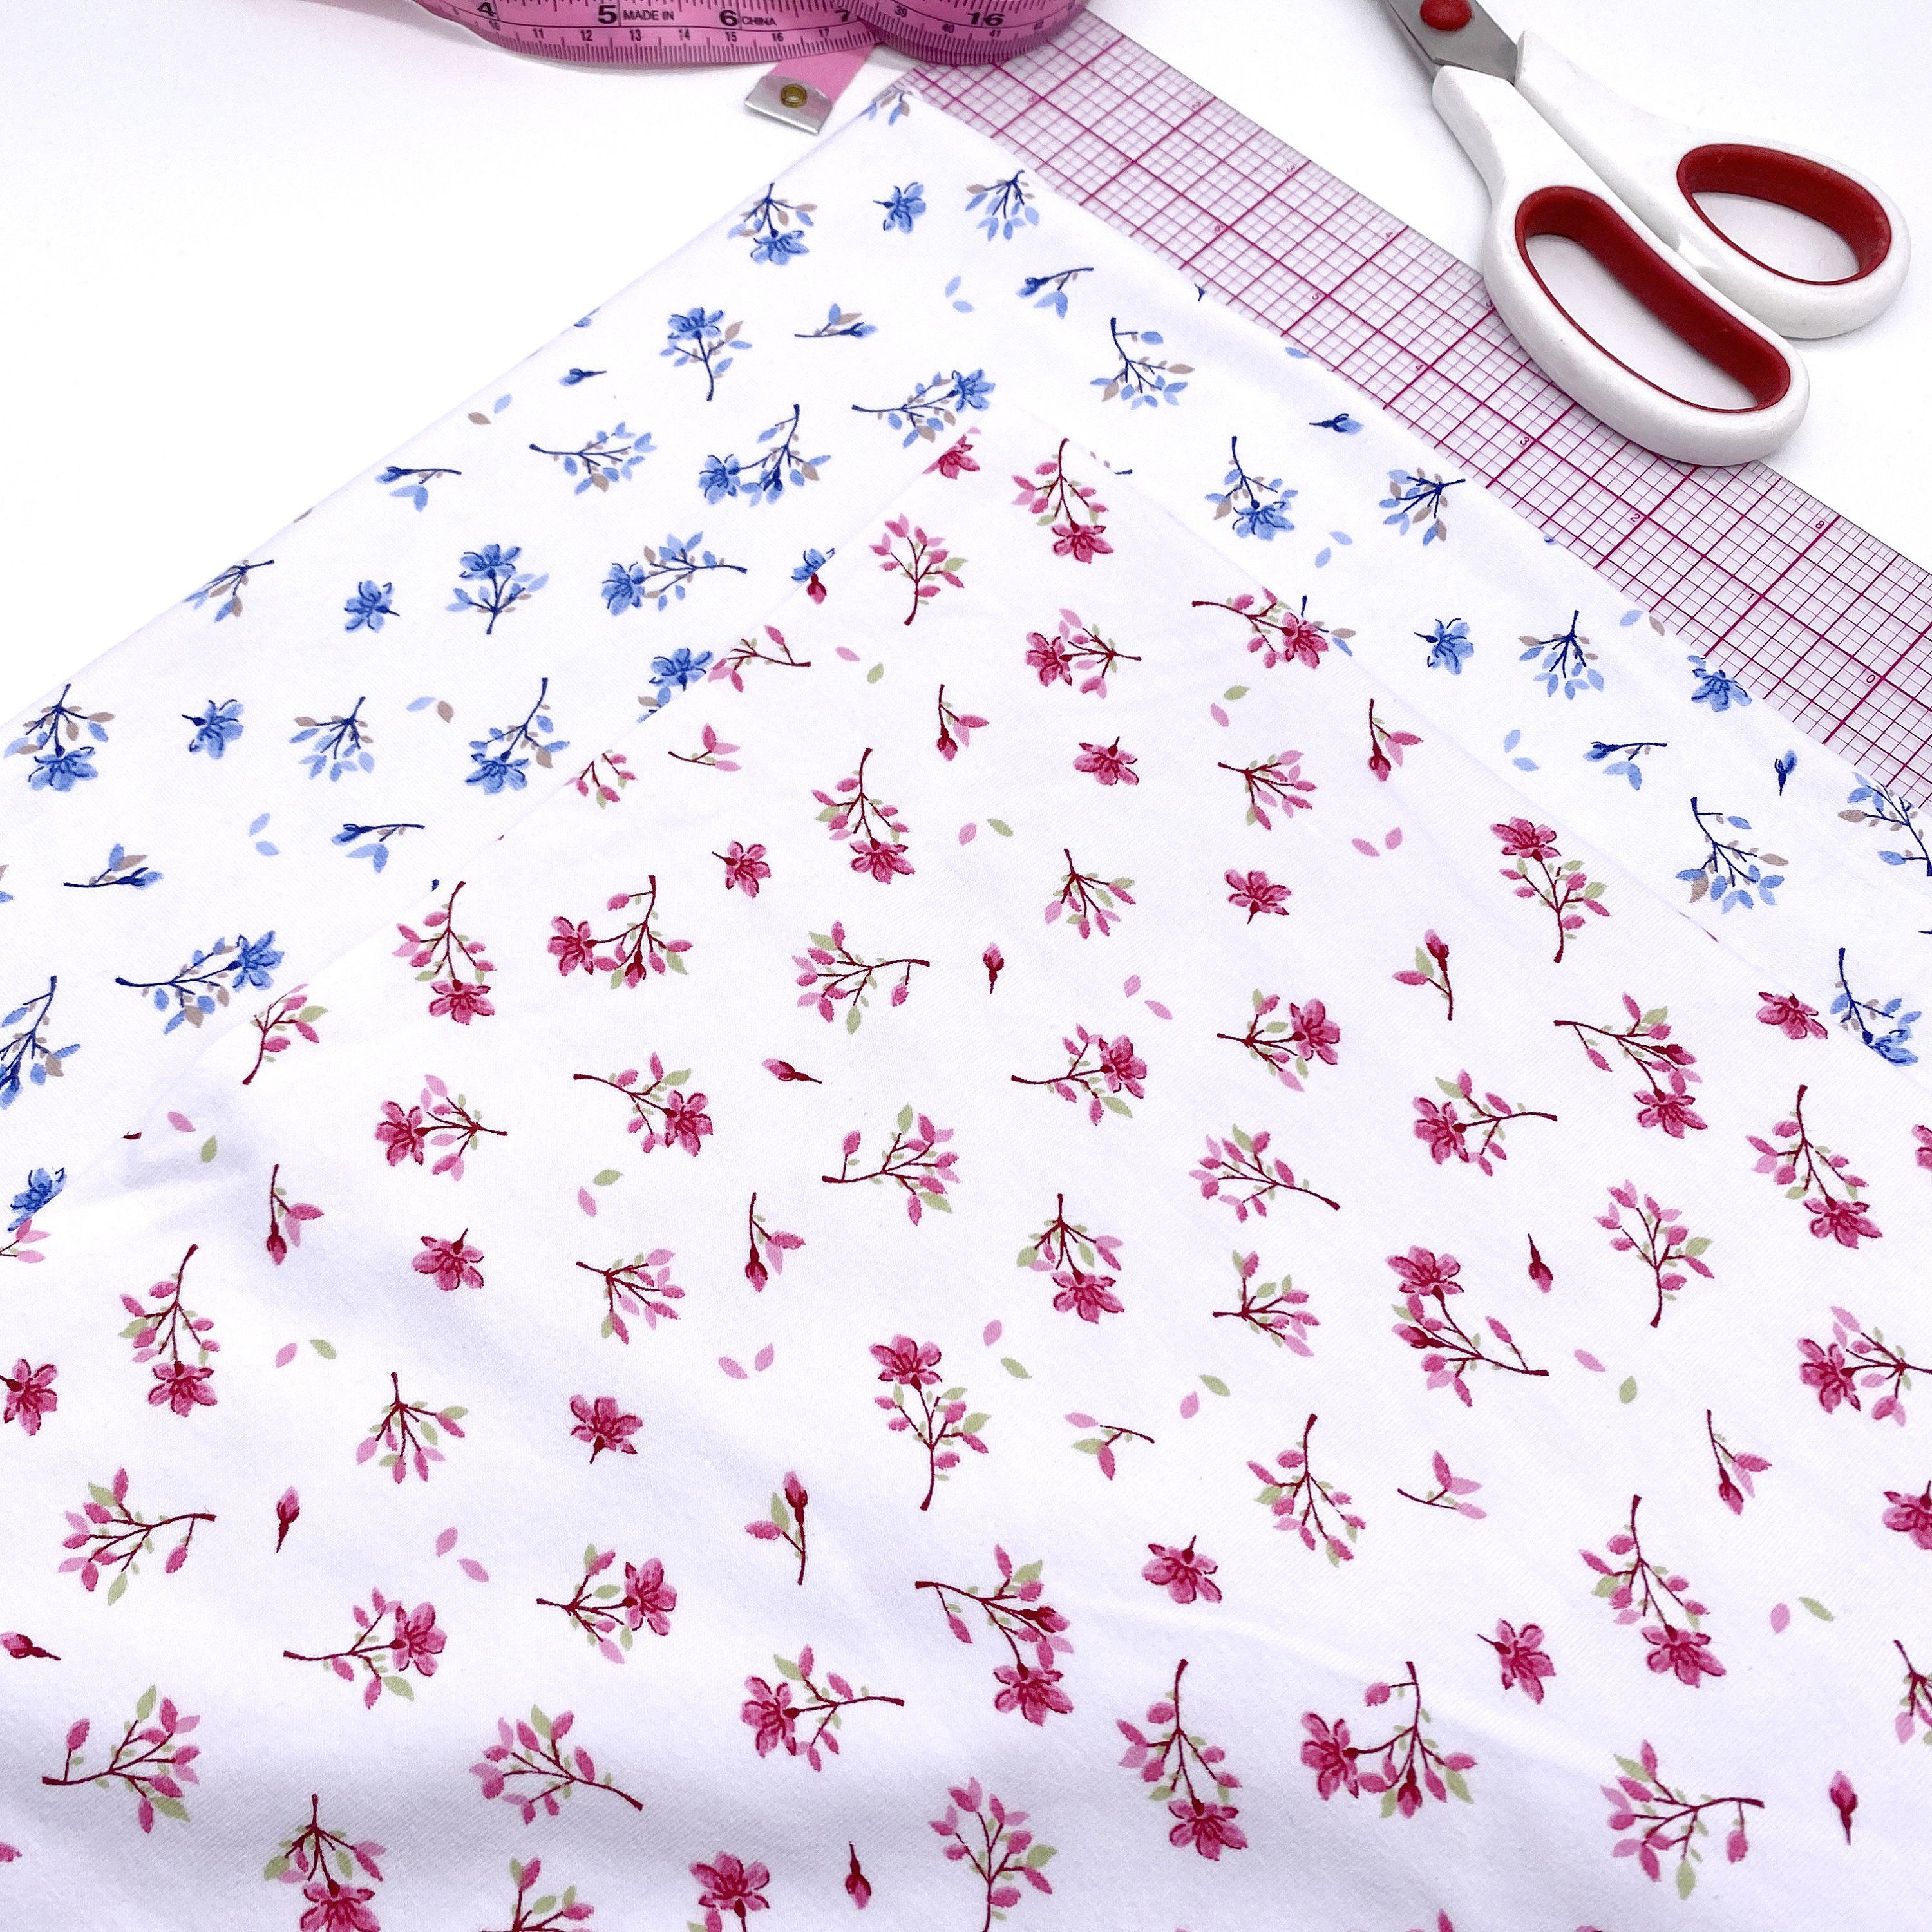 Cotton Spandex Knit Jersey Fabric, by the 1/2 Yard, in Blue or Pink Flowers Print-Stitch Love Studio